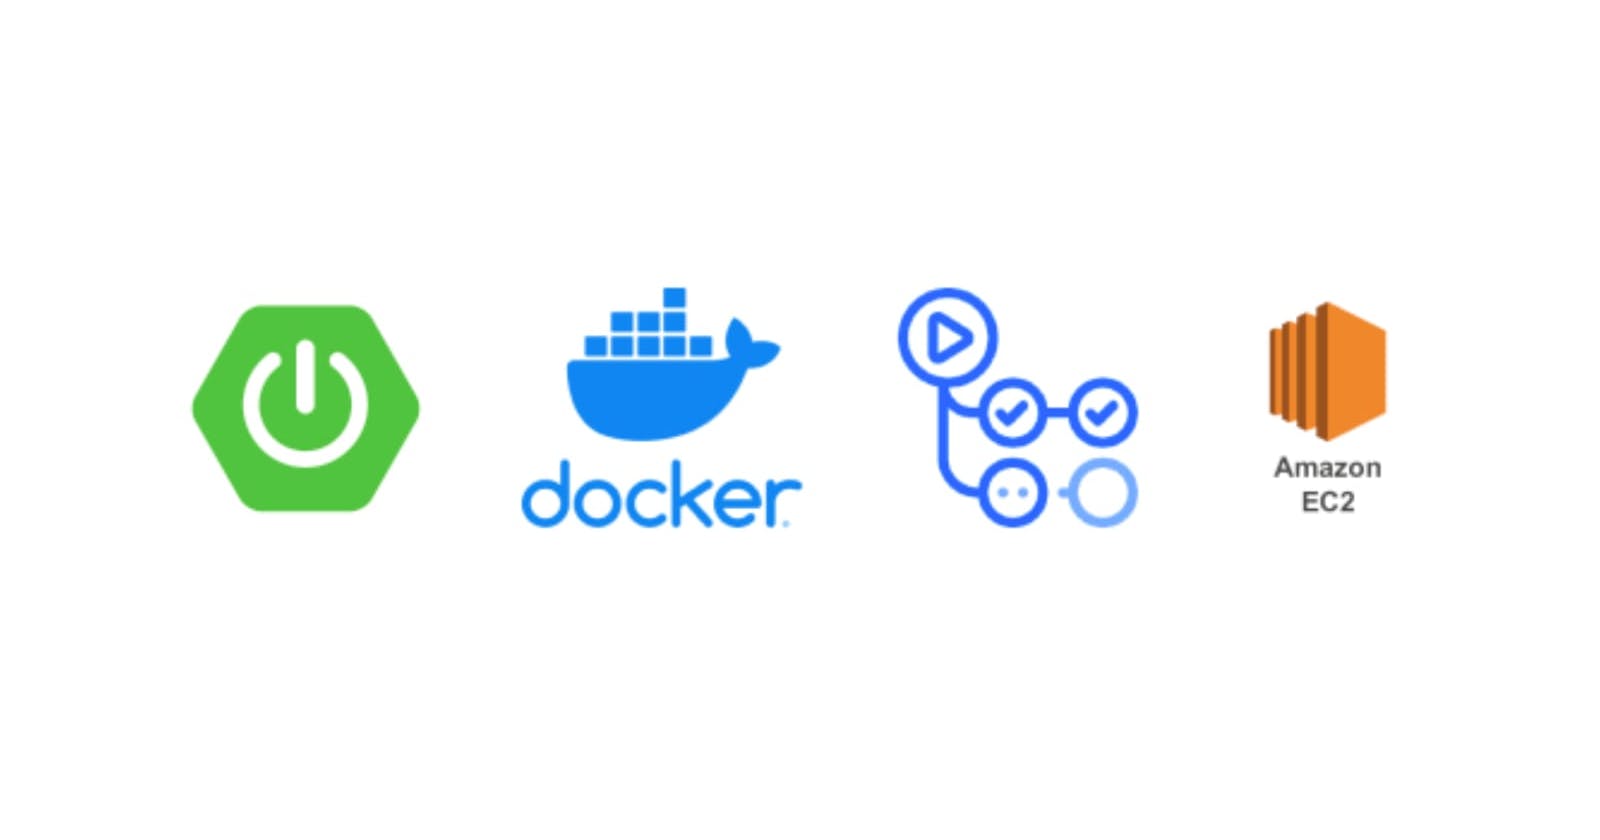 Deploy on EC2: GitHub Actions for Spring Boot and MongoDB with Docker